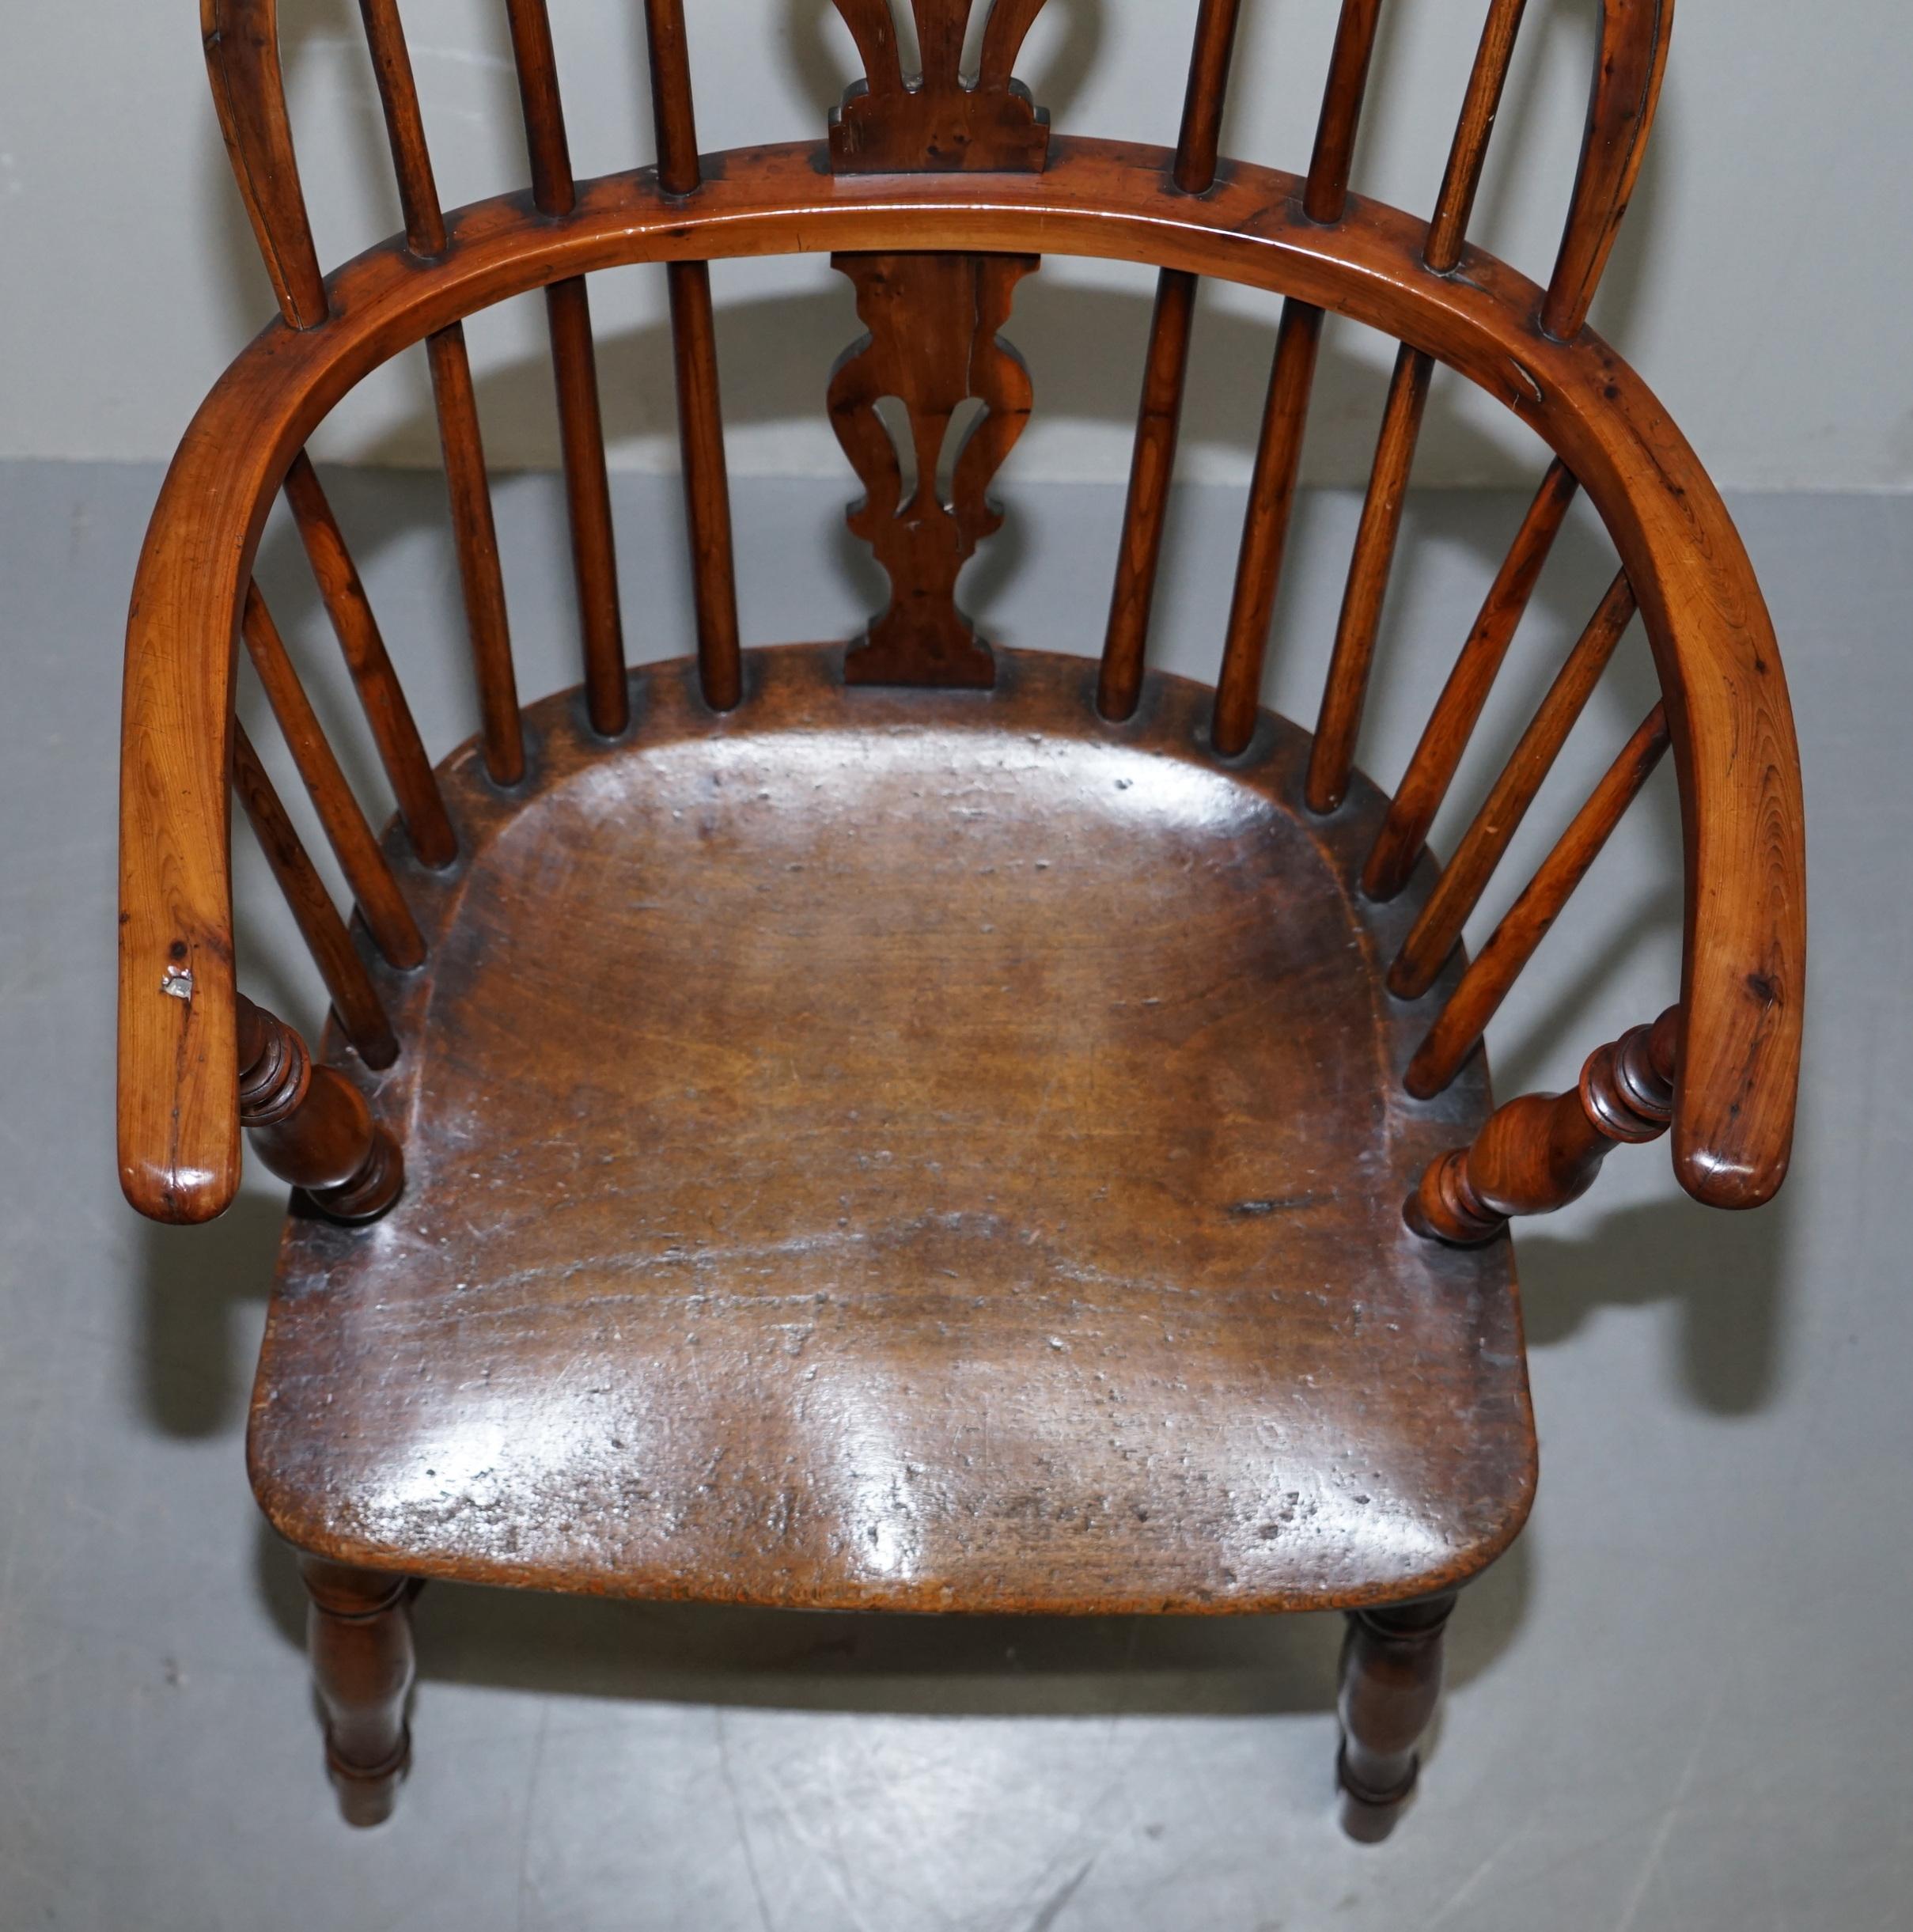 1 of 6 Burr Yew Wood Windsor Armchairs circa 1860 English Countryhouse Furniture For Sale 1